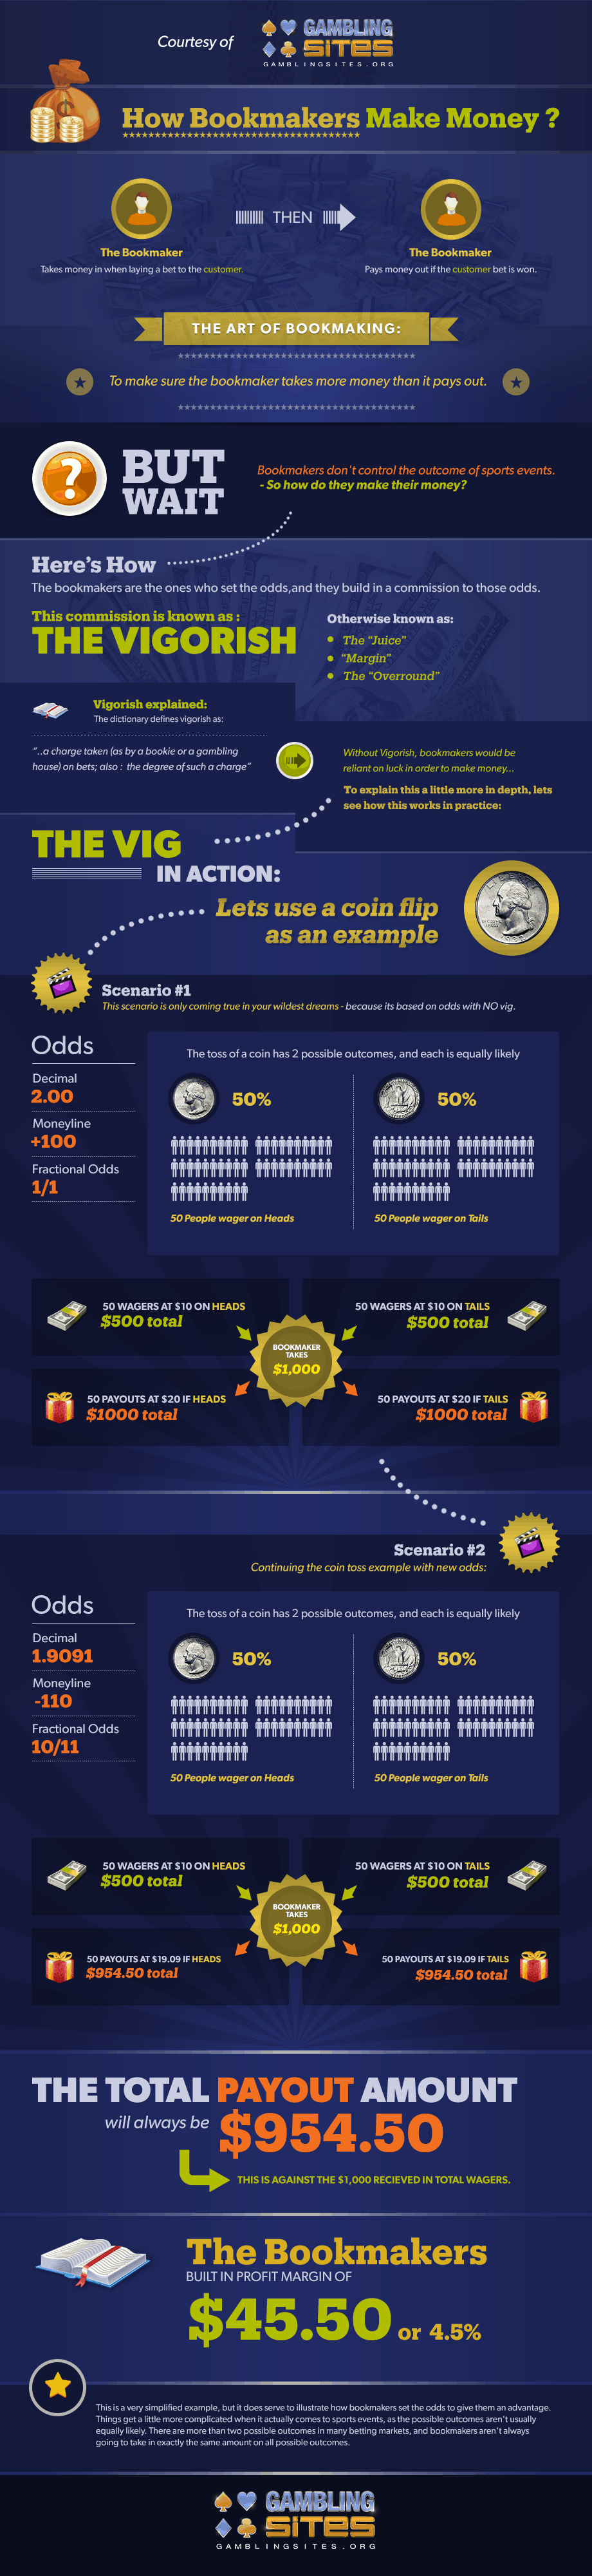 How Bookmakers Make Money Infographic